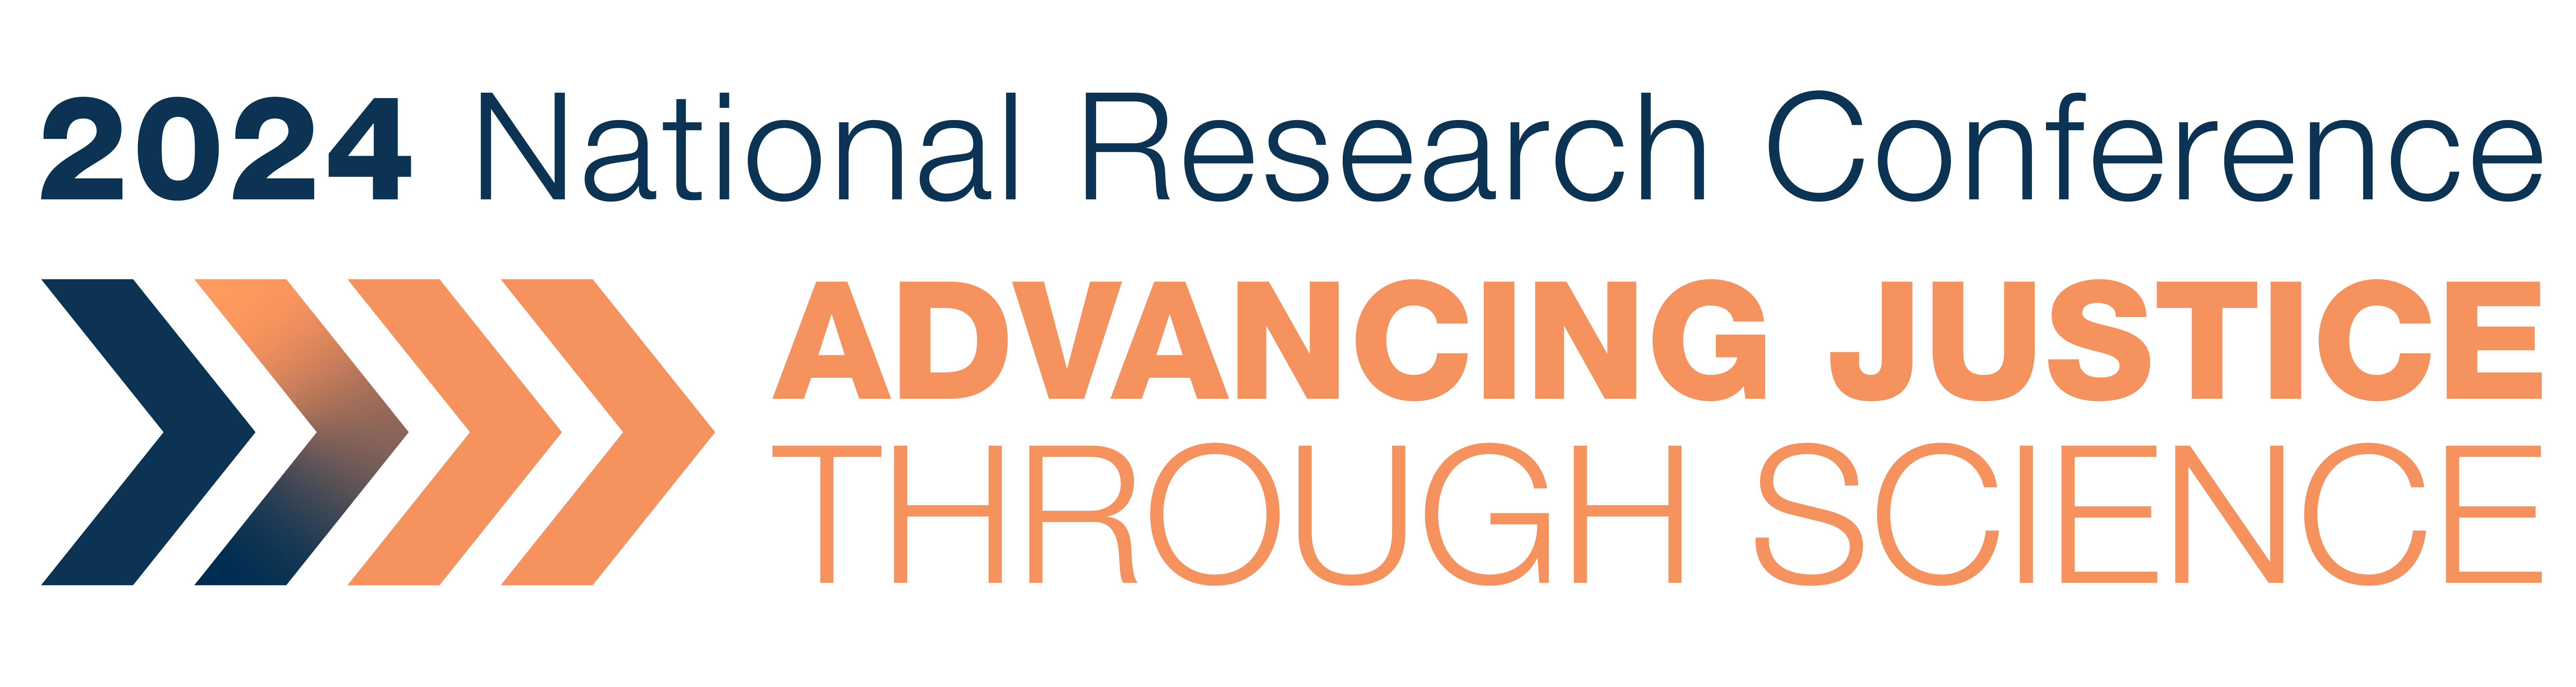 2024 National Research Conference - Advancing Justice Through Science